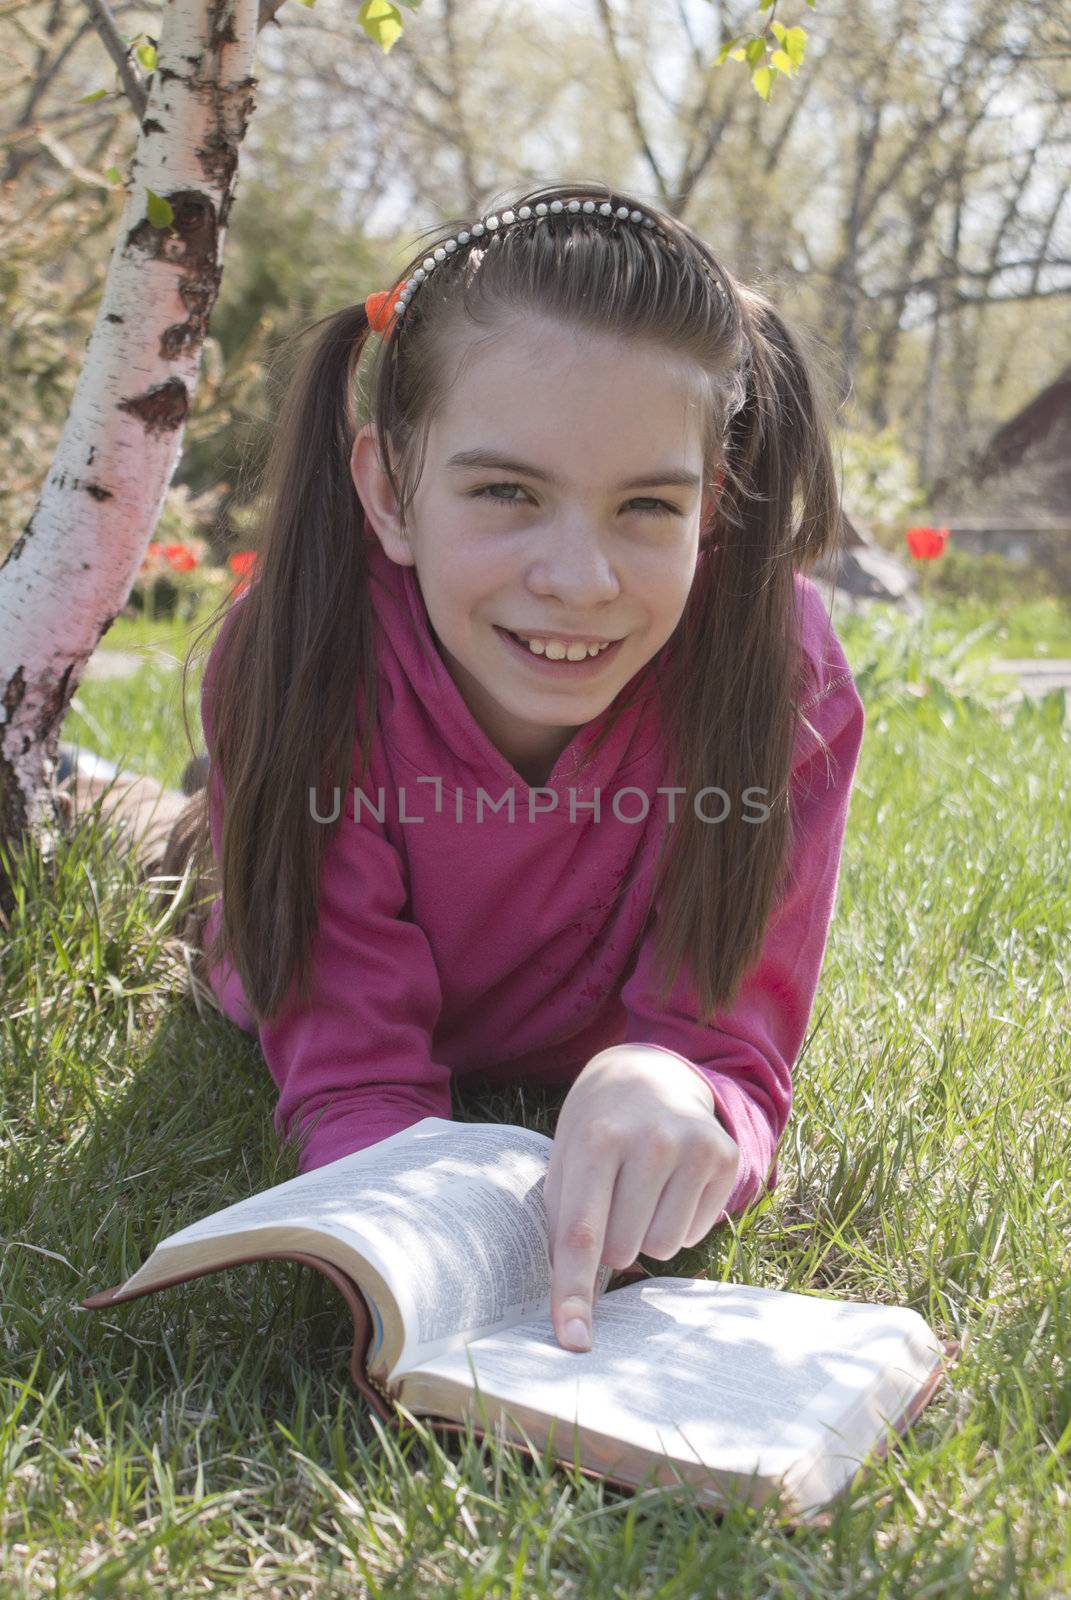 Teen girl reads book sitting on grass by AndreyKr